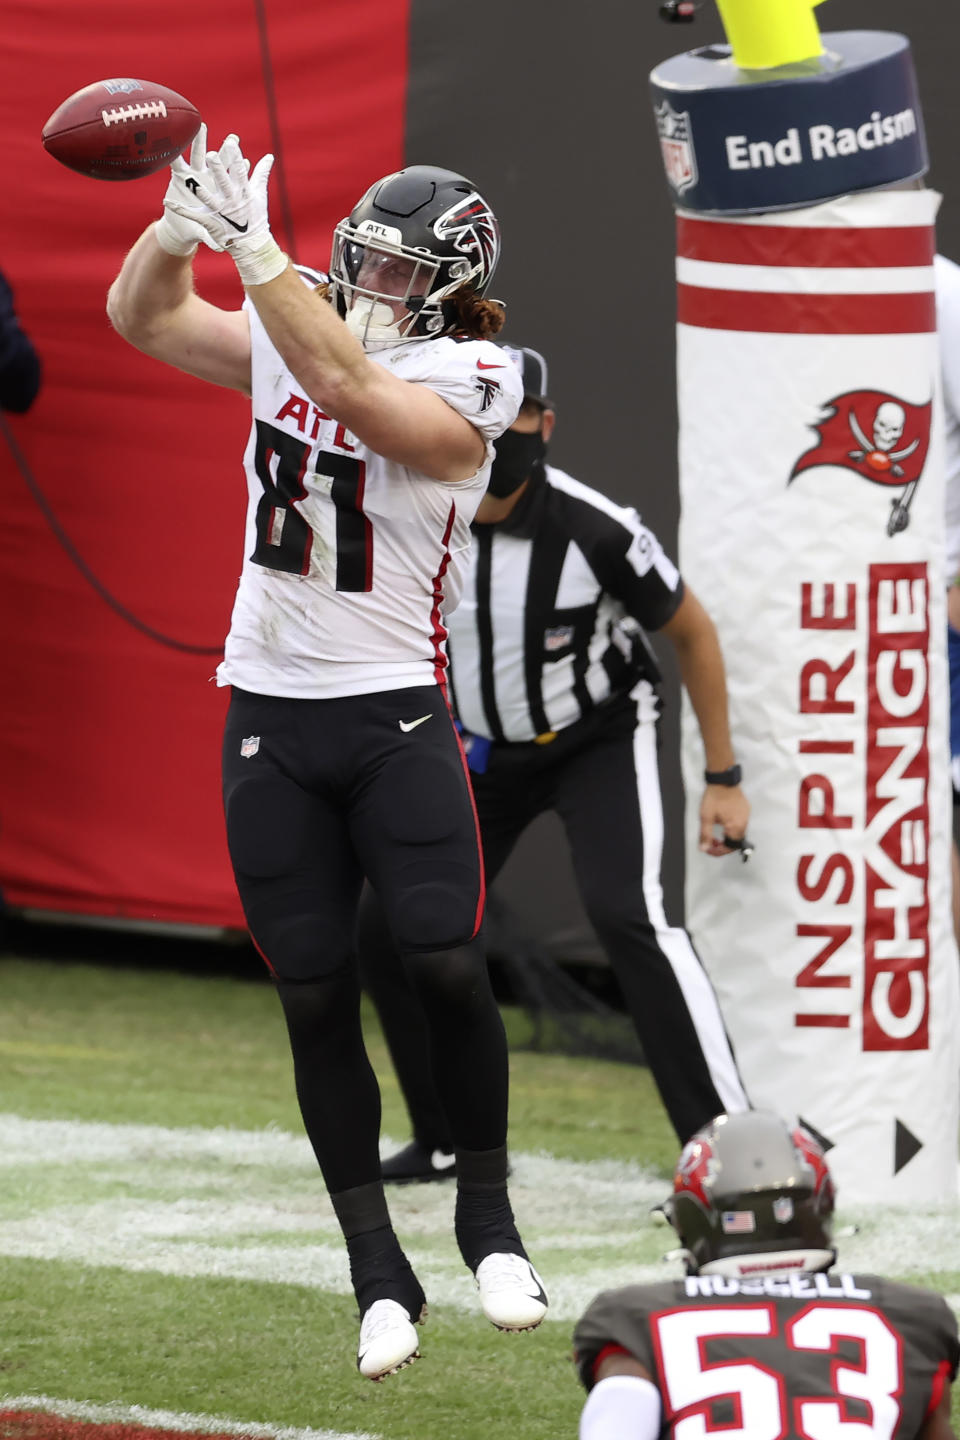 Atlanta Falcons tight end Hayden Hurst (81) catches a touchdown pass against the Tampa Bay Buccaneers during the second half of an NFL football game Sunday, Jan. 3, 2021, in Tampa, Fla. (AP Photo/Mark LoMoglio)